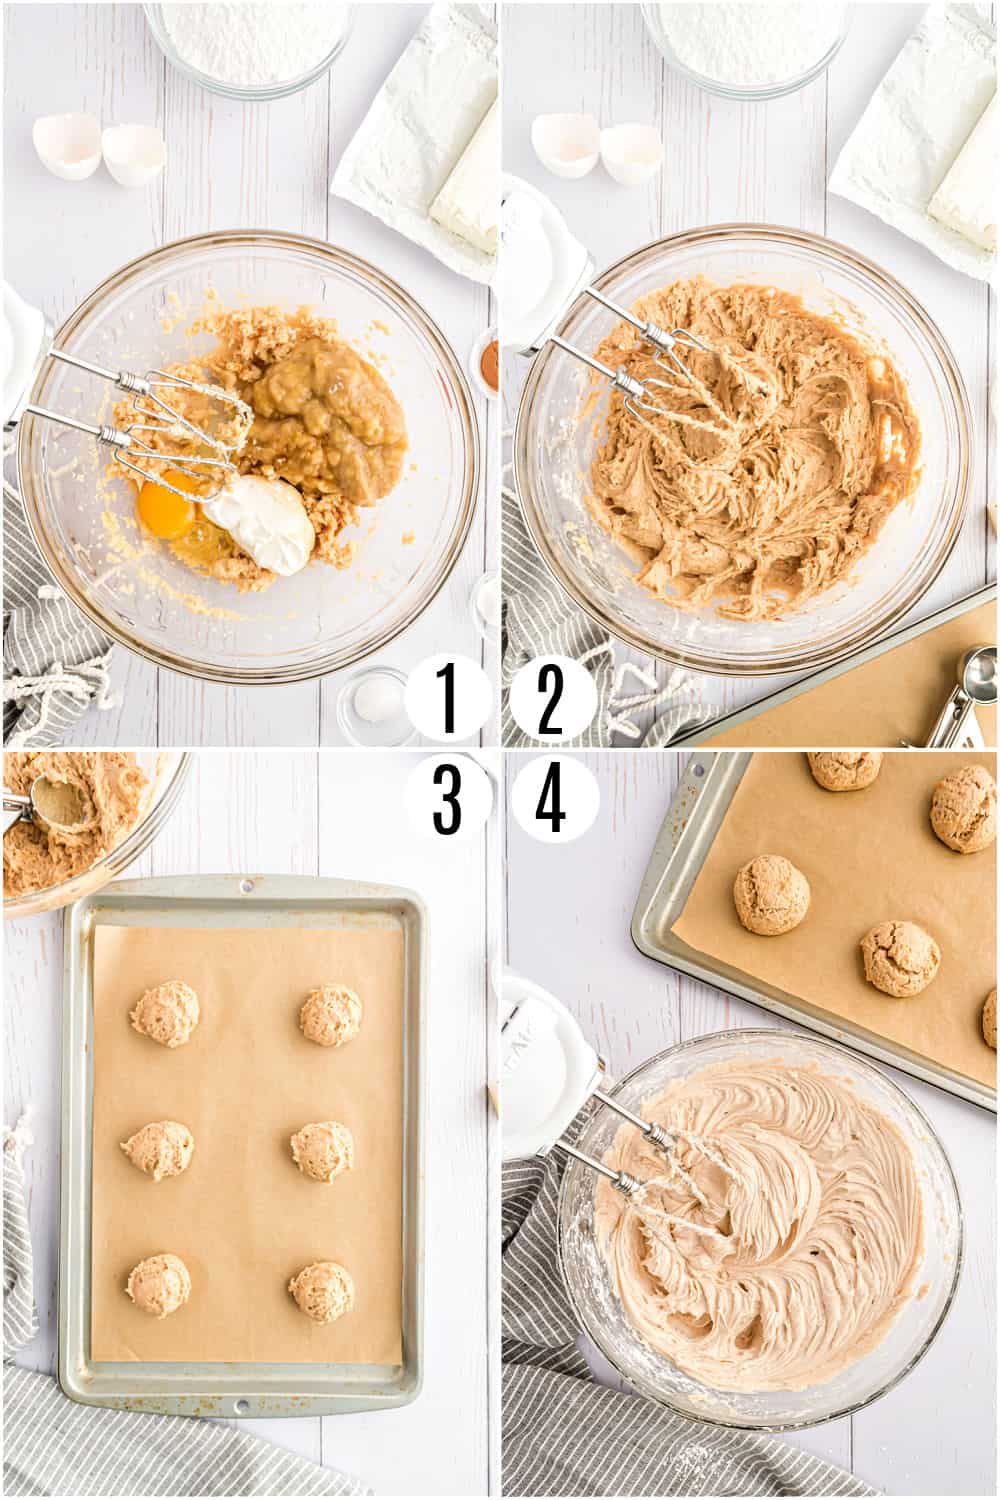 Step by step photos showing how to make banana cookies.